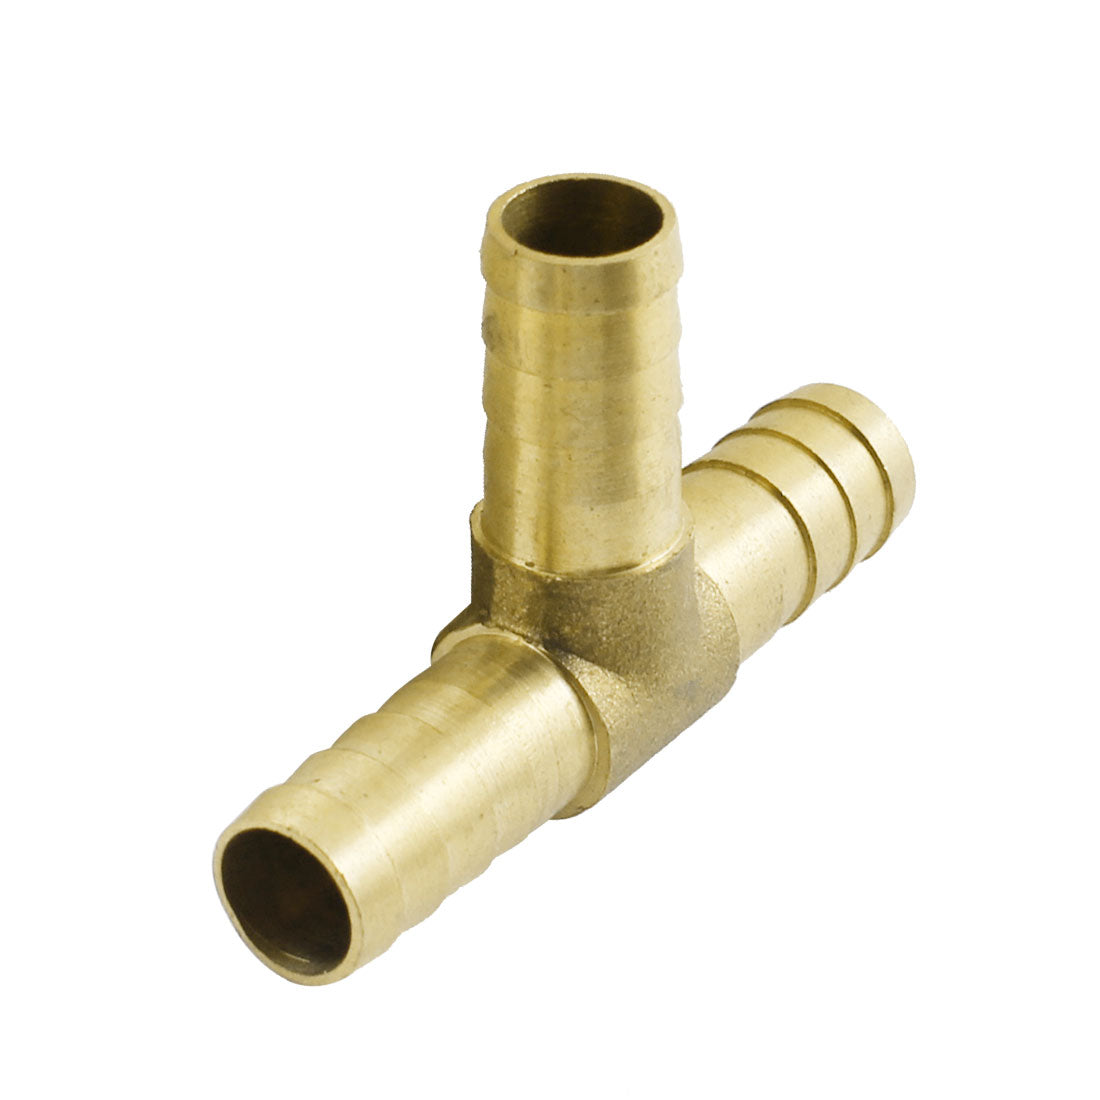 uxcell Uxcell 10mm Dia T Piece Air Water Fuel Brass Hose Joiner Tee Pipe Tube Fitting Connector 51 x 32mm(L xH)